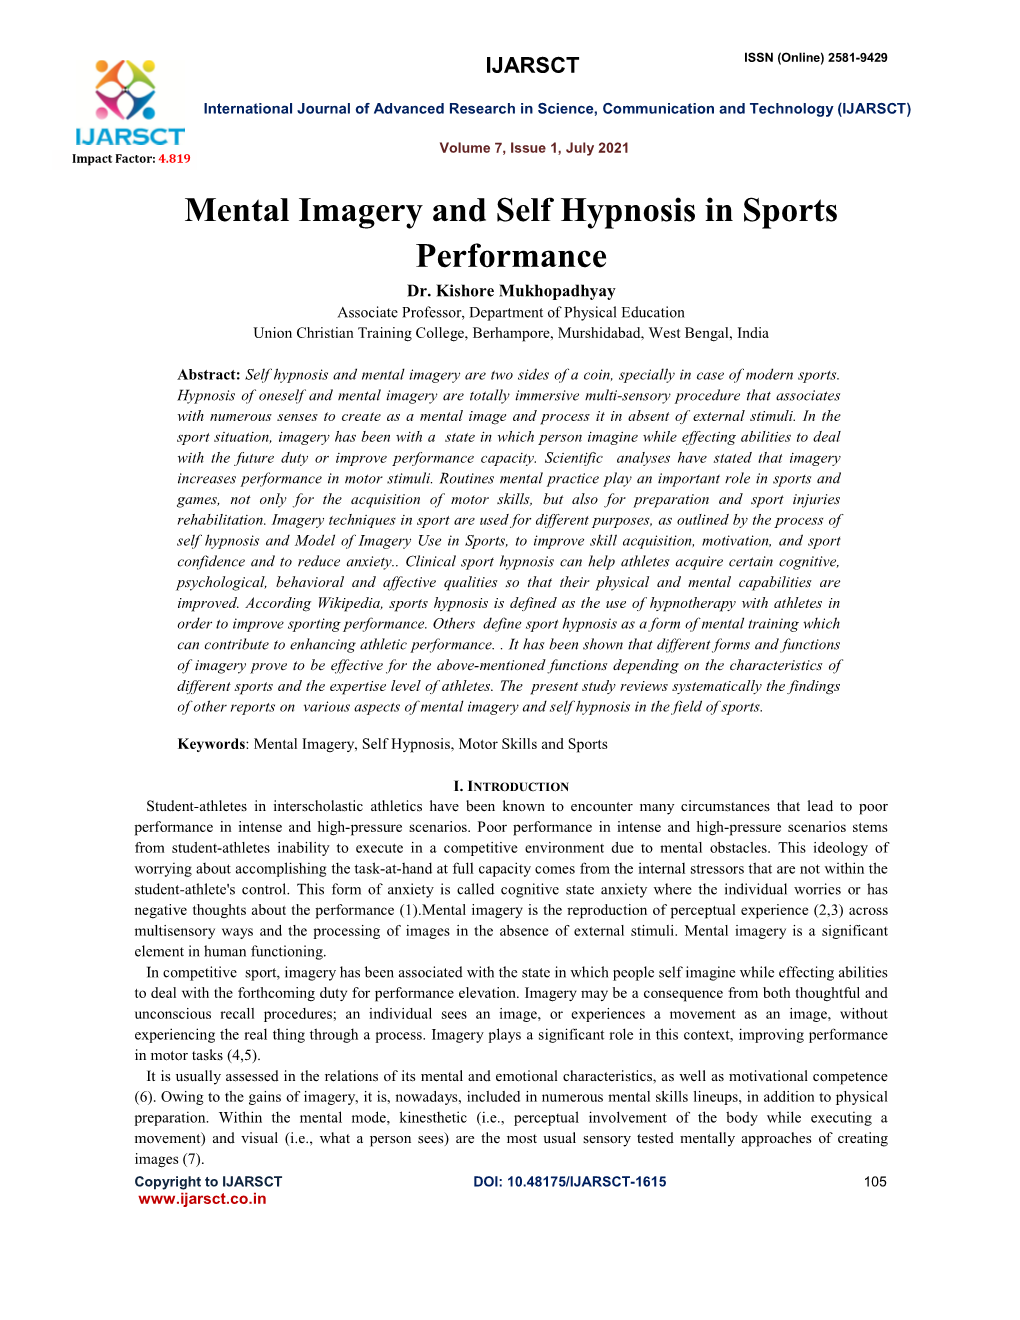 Mental Imagery and Self Hypnosis in Sports Performance Dr